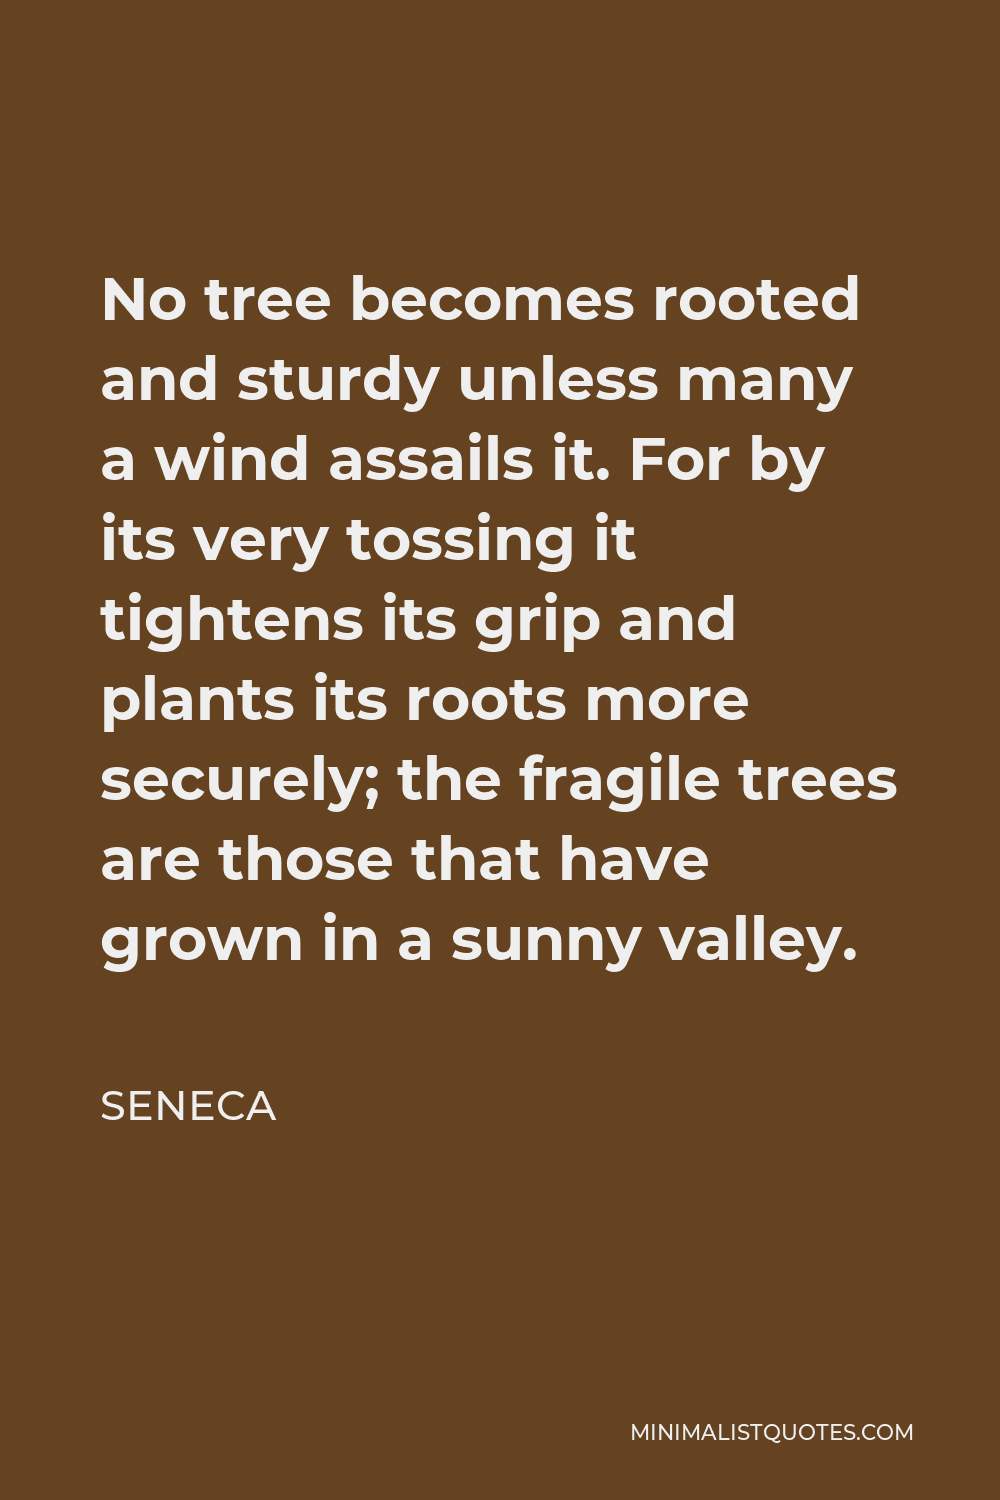 Seneca Quote - No tree becomes rooted and sturdy unless many a wind assails it. For by its very tossing it tightens its grip and plants its roots more securely; the fragile trees are those that have grown in a sunny valley.